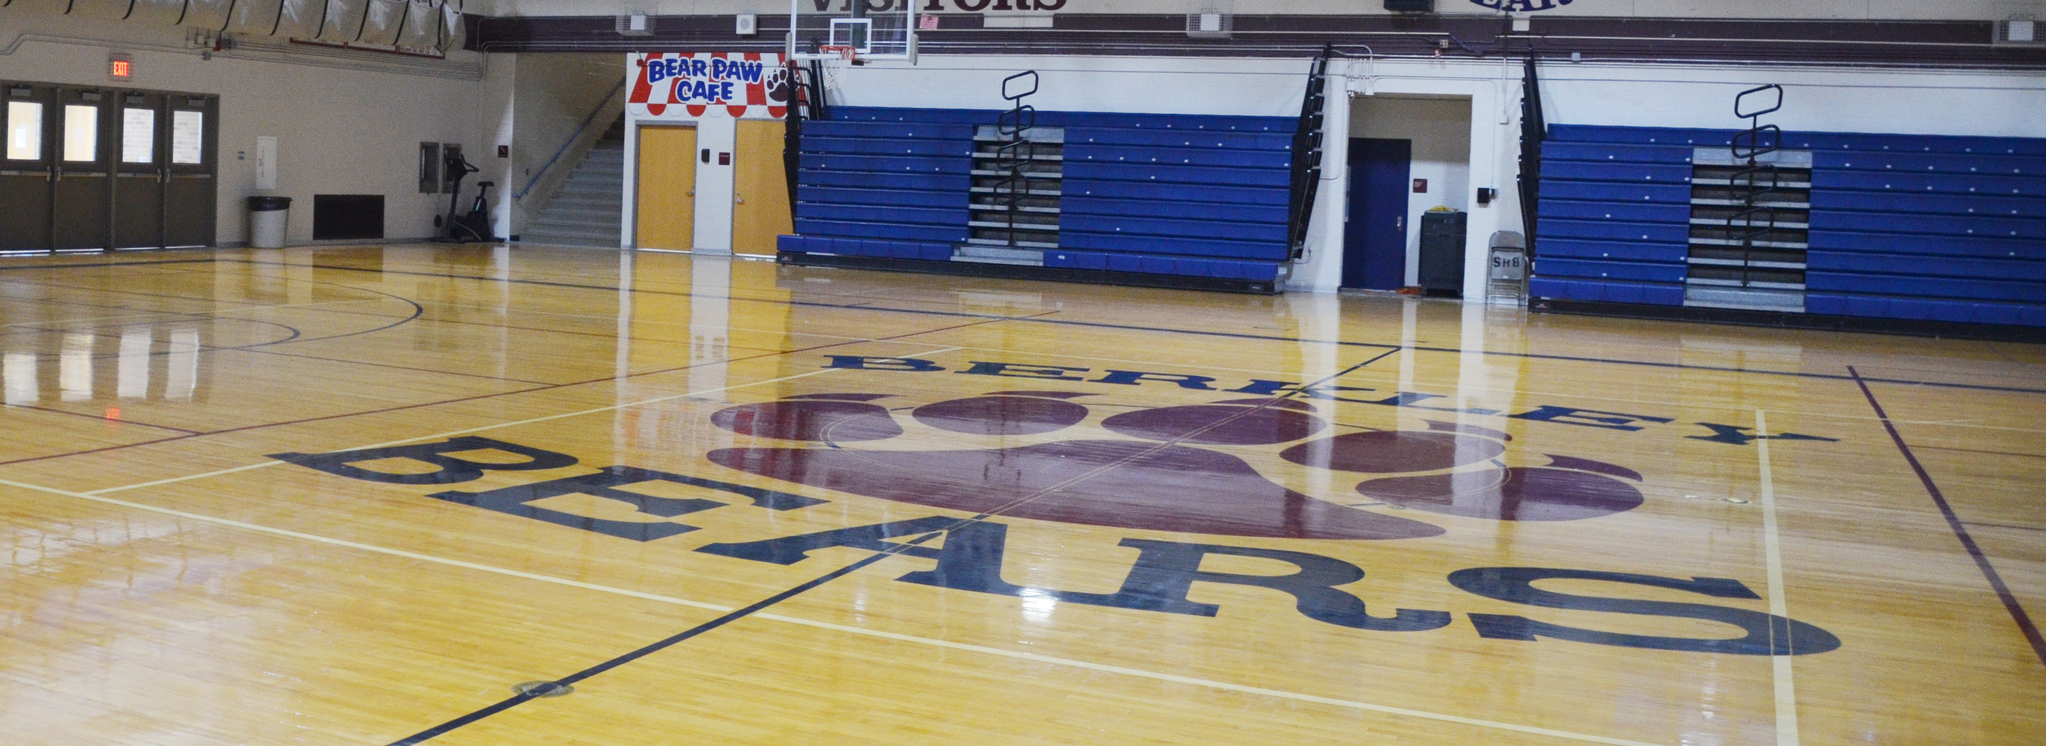 Photo of a gym floor with a bear paw and the words Berkley Bears in the center of it.